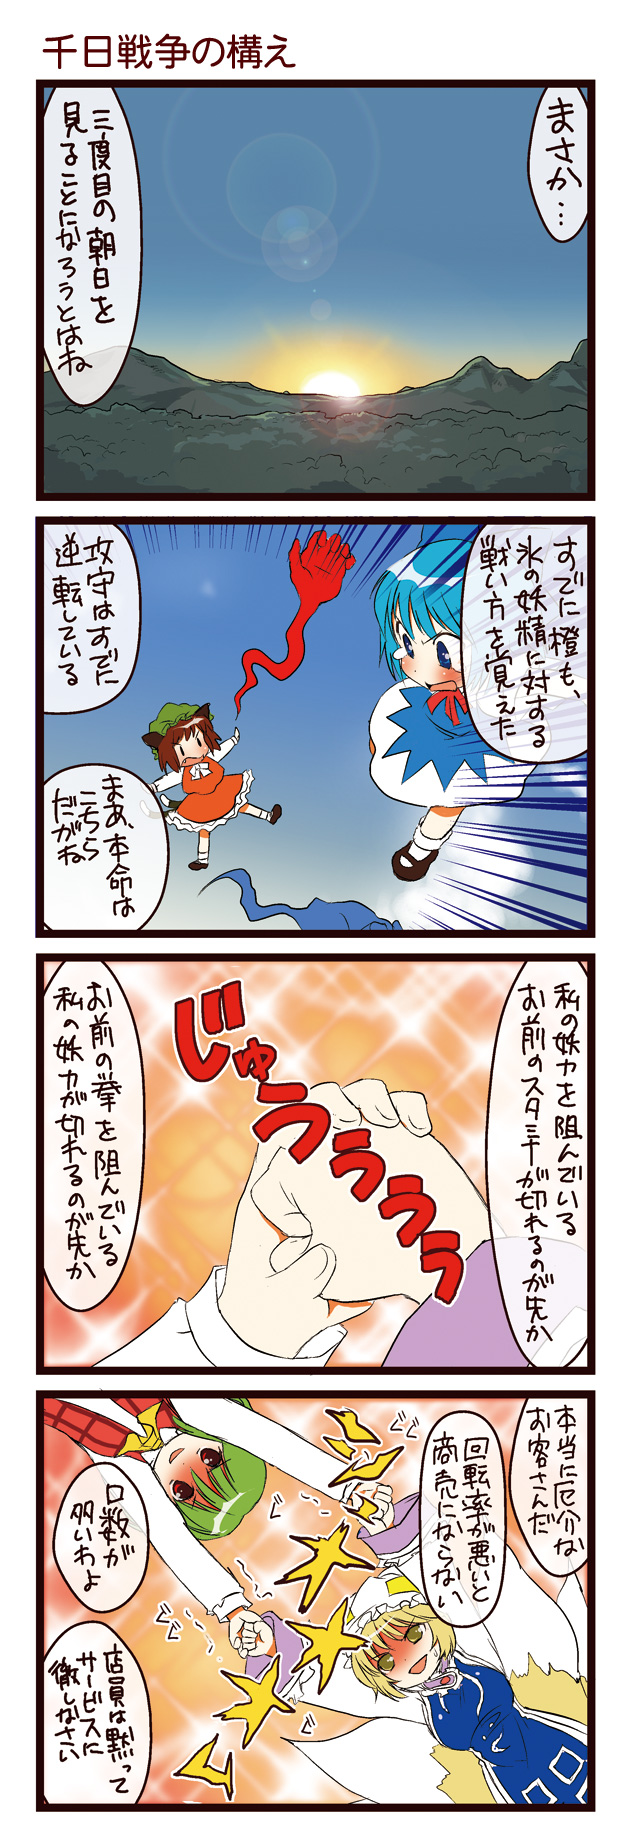 4koma animal_ears ascot battle cat_ears chen cirno comic dei_shirou emphasis_lines fang flying forest fox_tail highres kazami_yuuka mountain multiple_tails nature orenji_zerii plaid_vest red_faced scenery sparkle sunrise tail teardrop touhou translation_request yakumo_ran